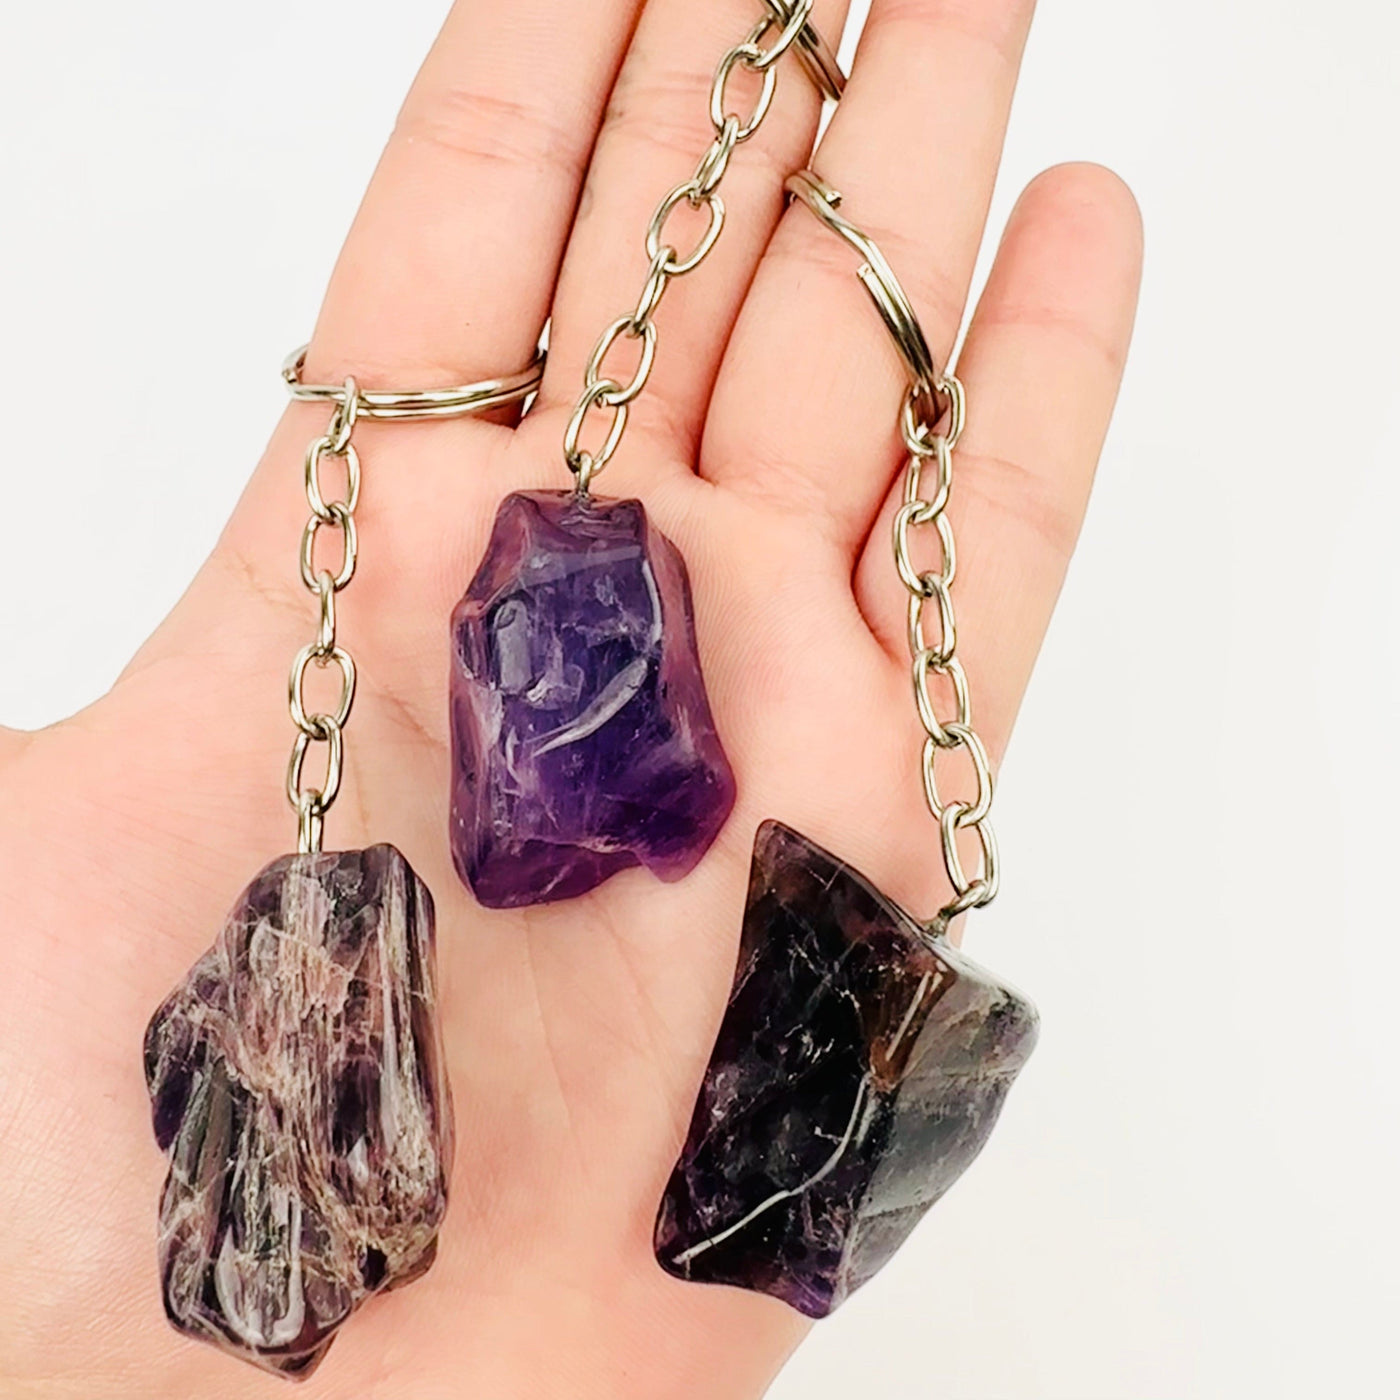 Amethyst Polished Freeform Silver Toned Key Chain - Tumbled Purple Stone - three key chains on hand for size reference 